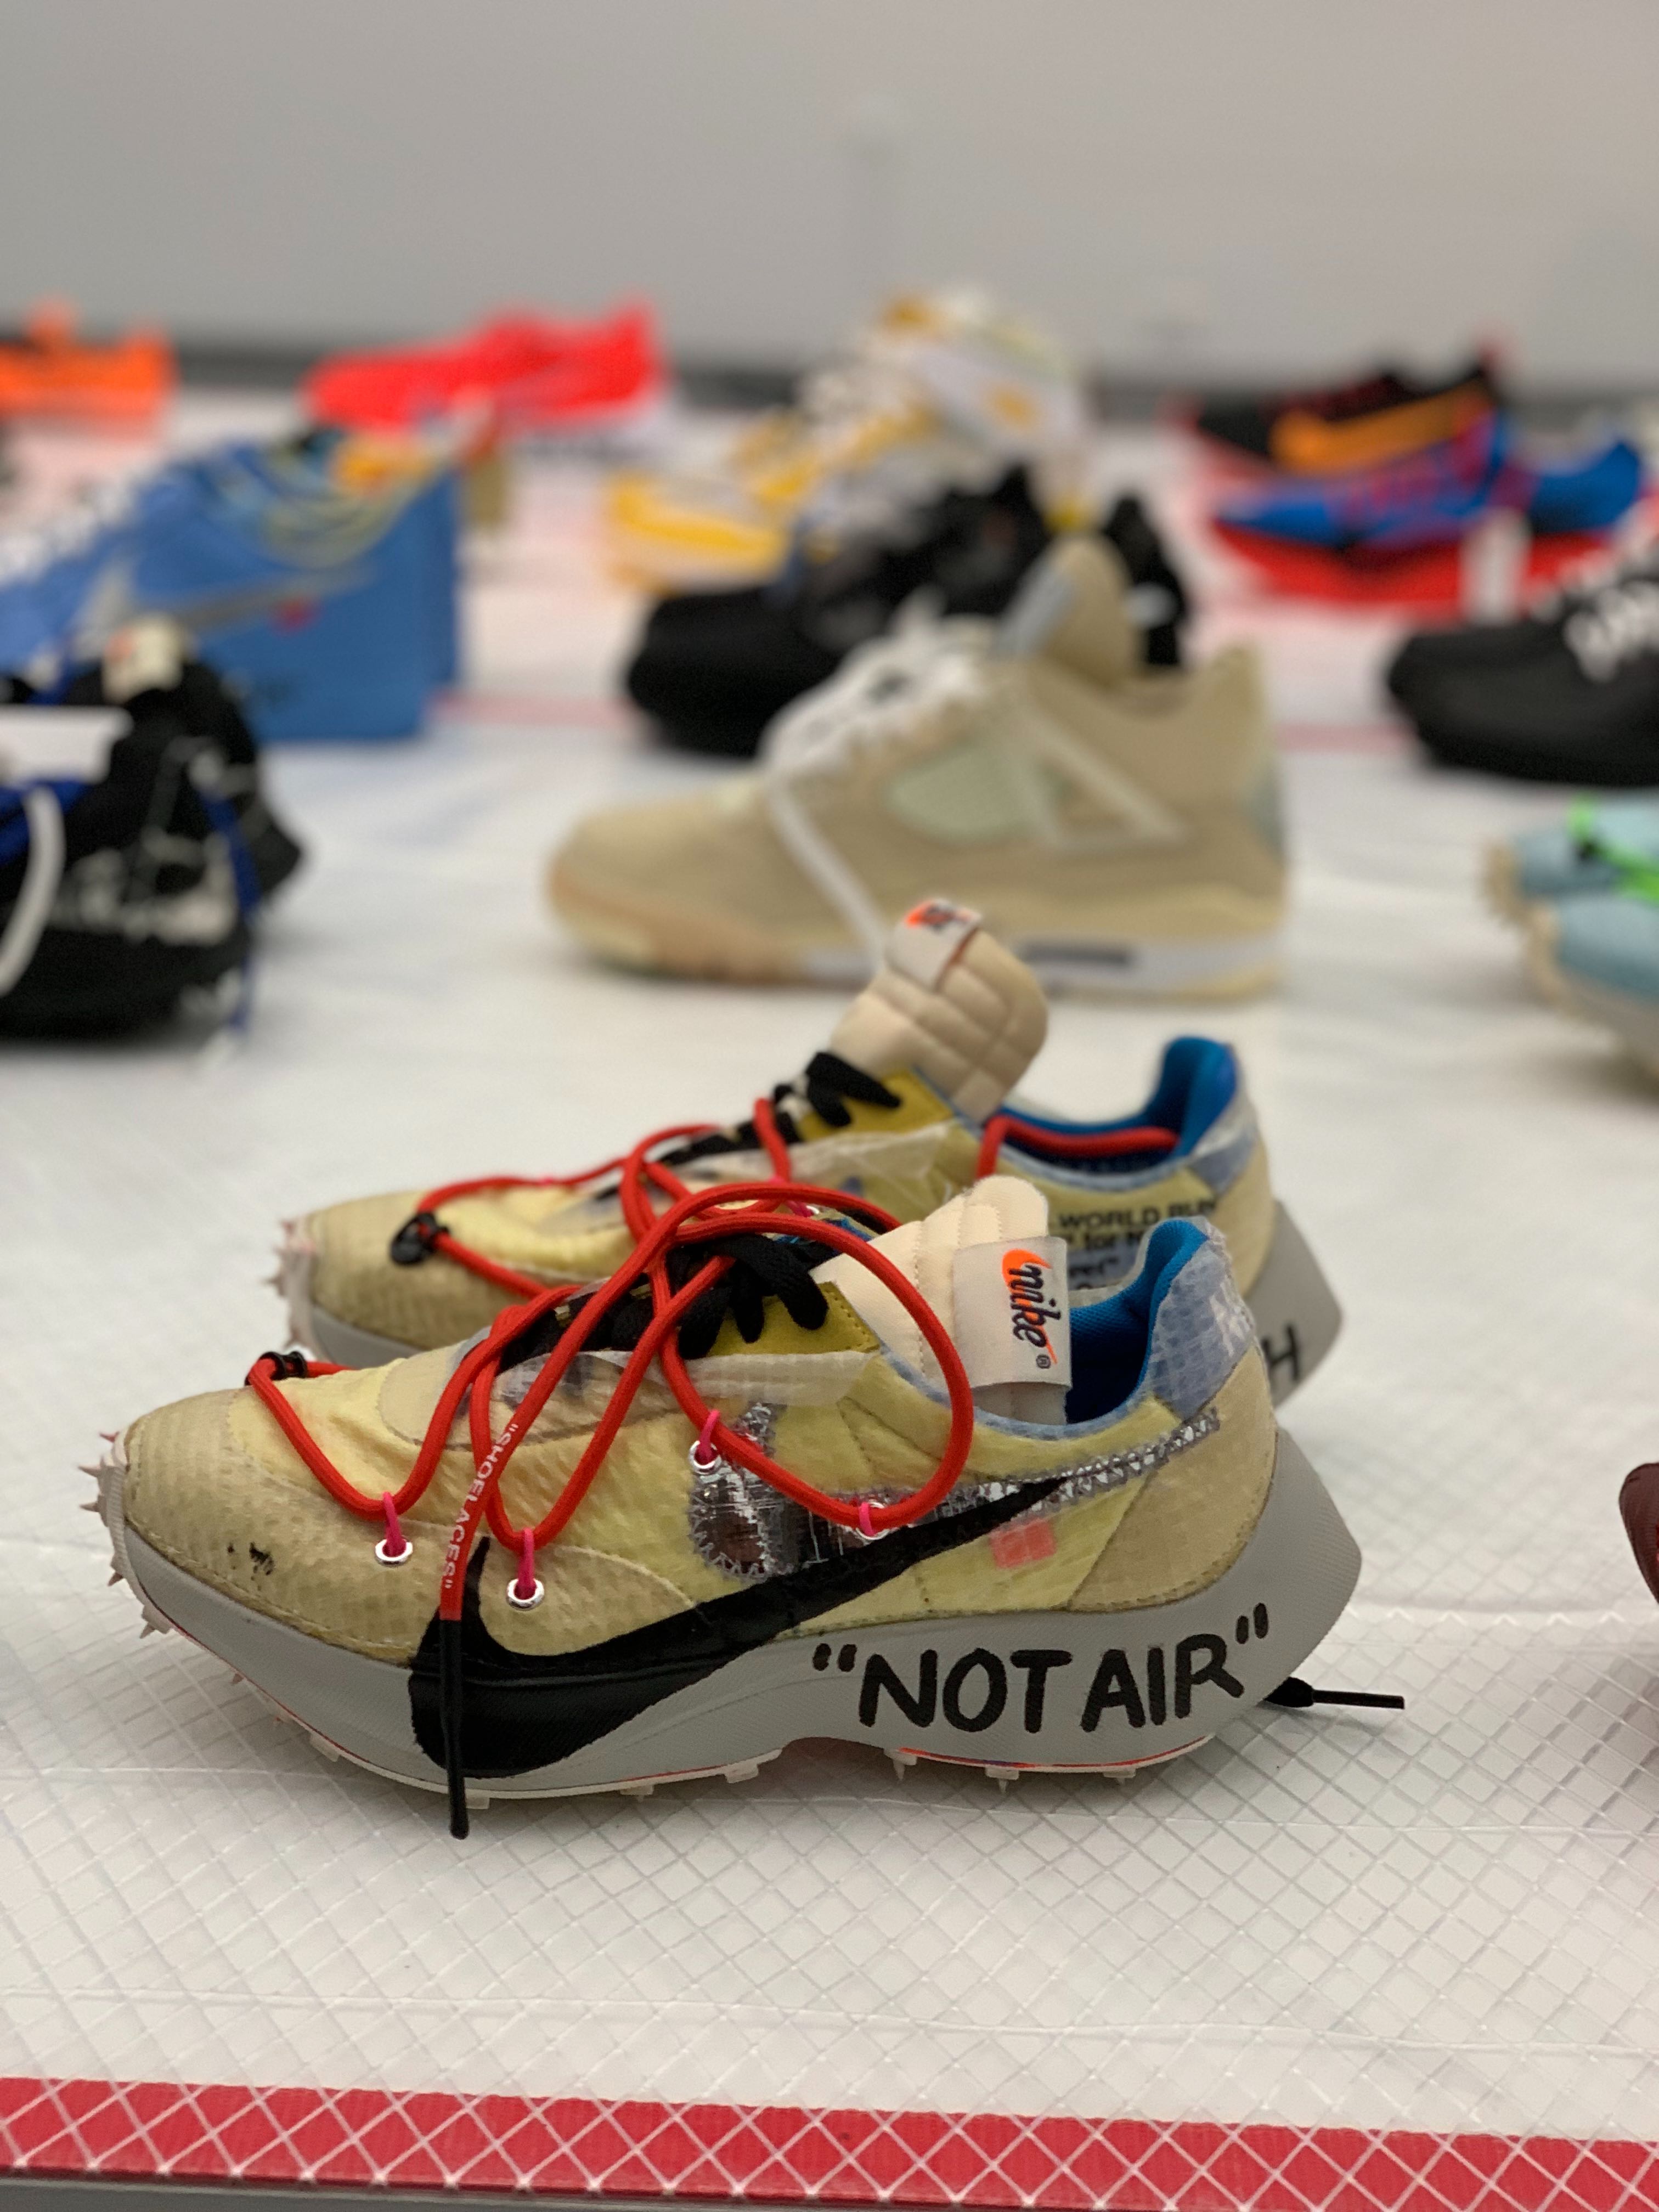 Virgil Abloh showed the first-ever sample of the Off-White™ x Nike Air  Jordan 1